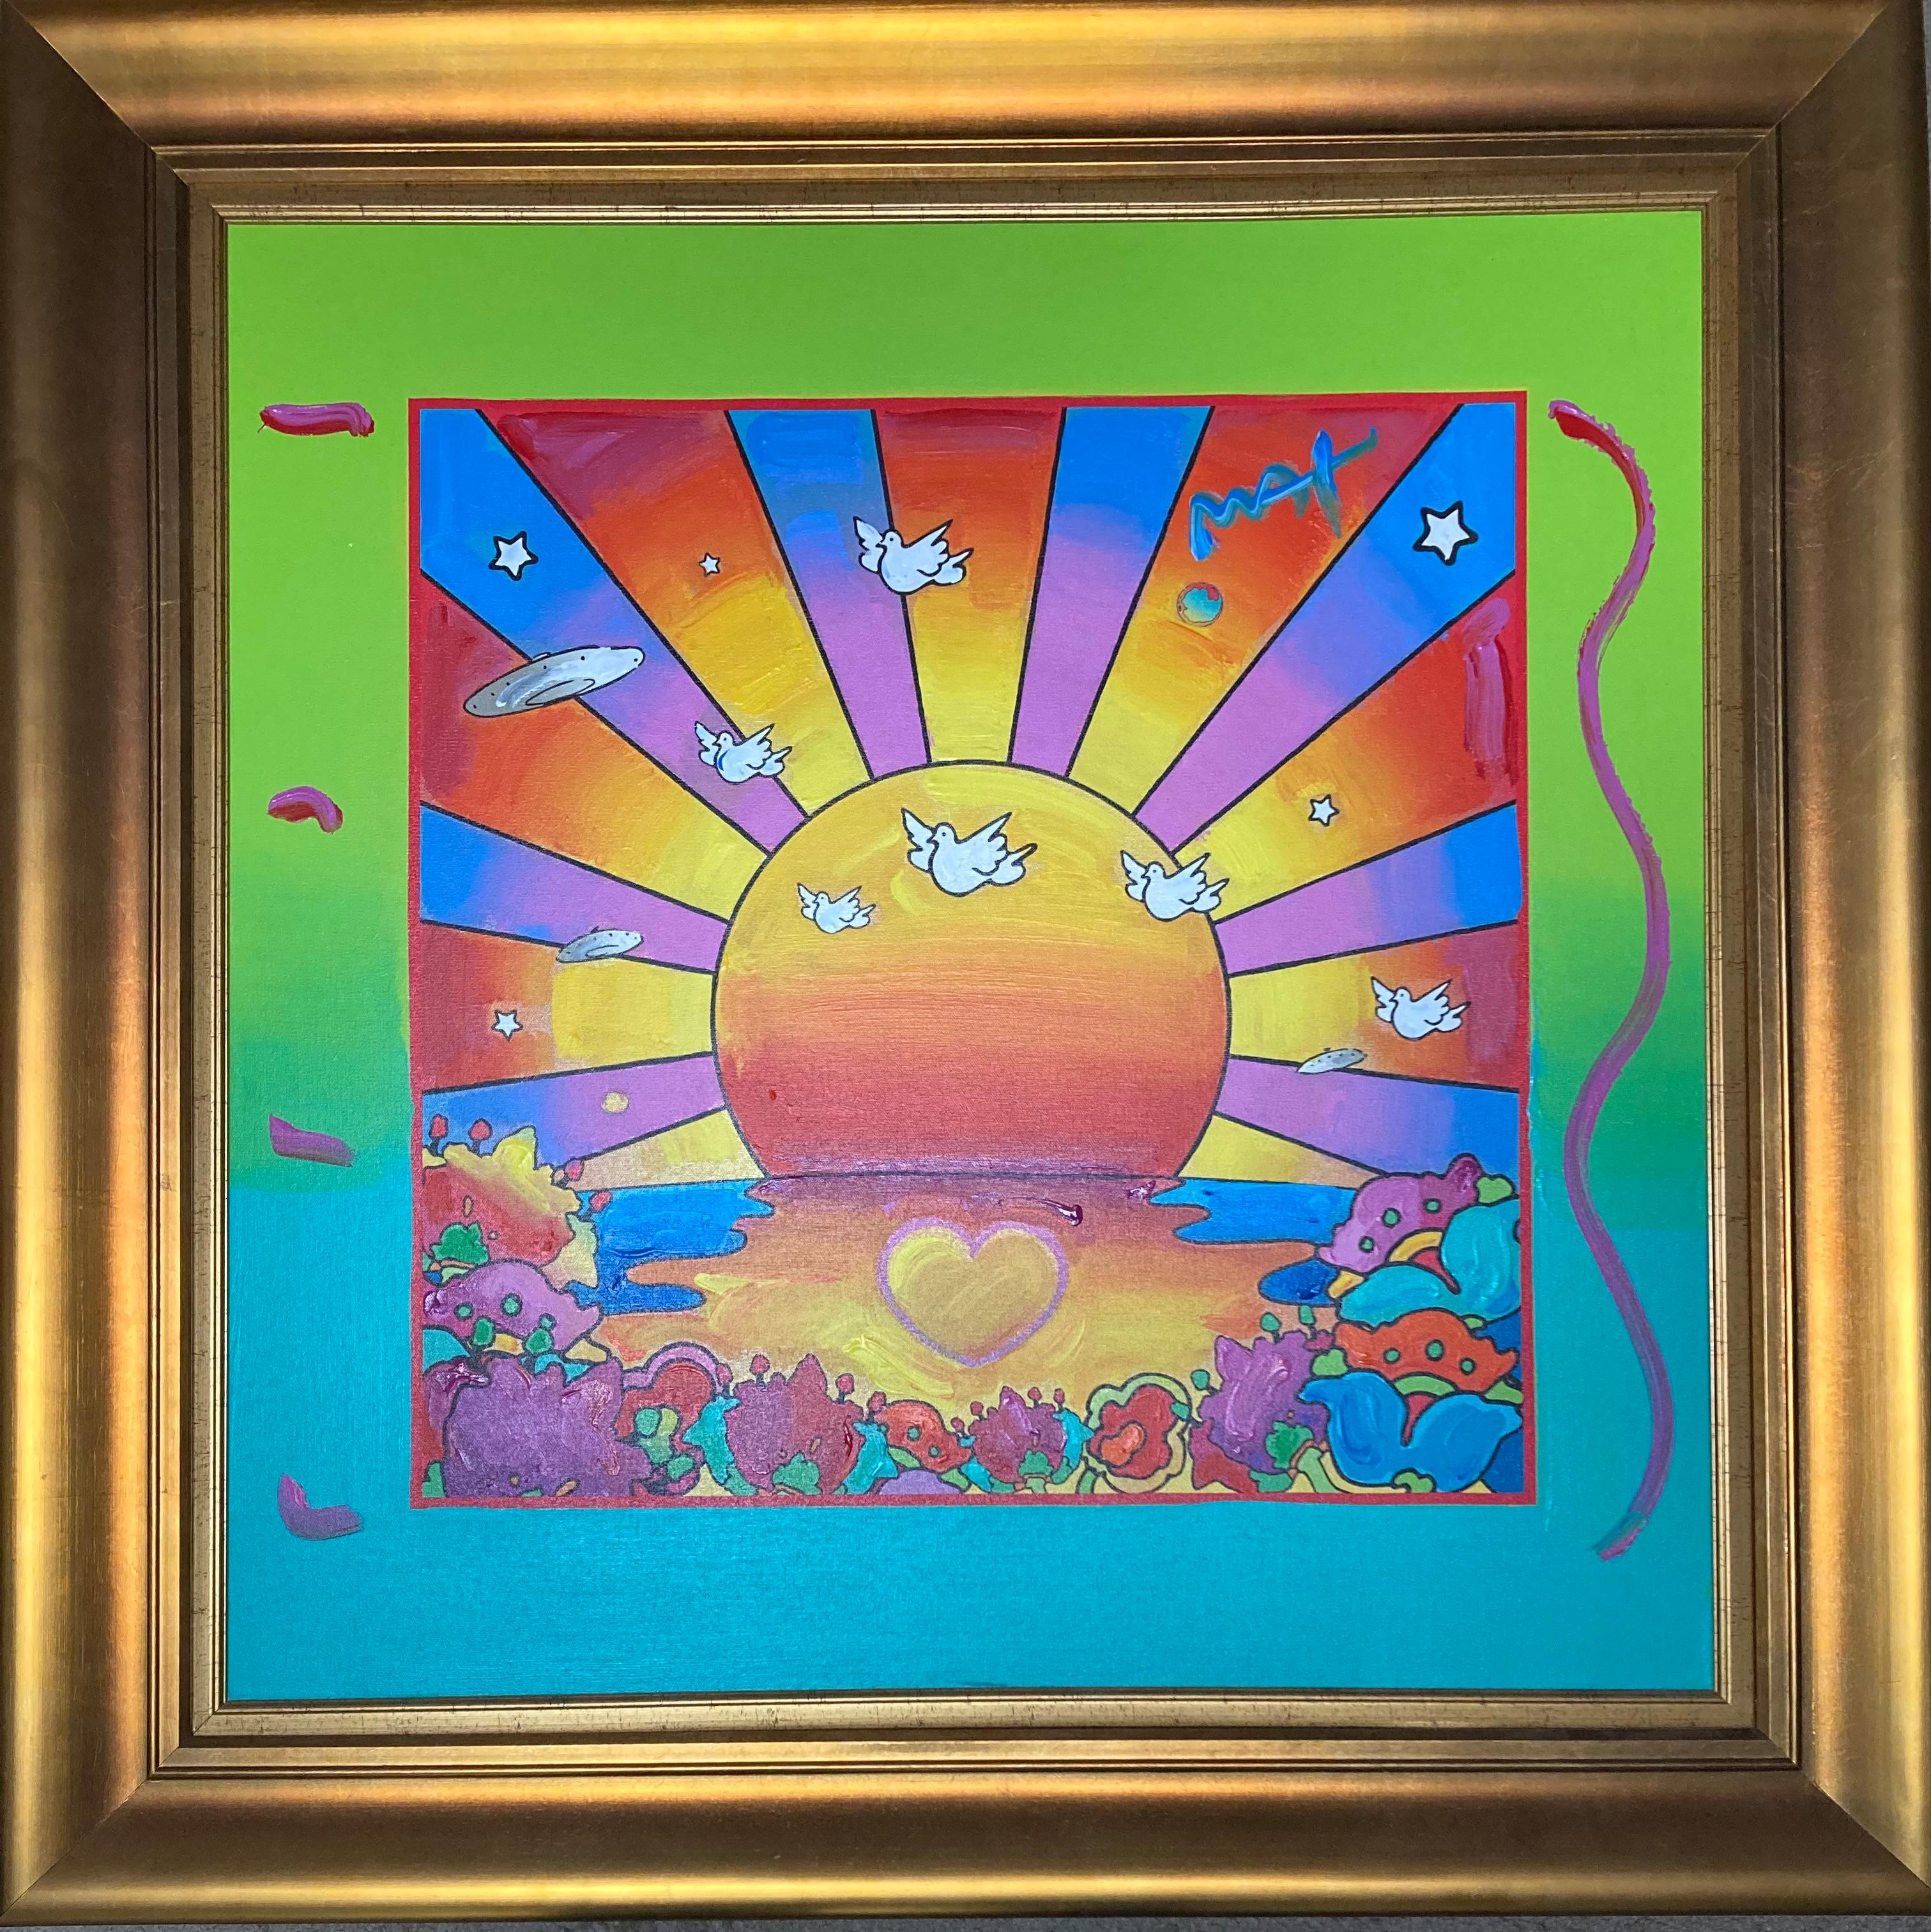 “Sunrise 2000” - Painting by Peter Max